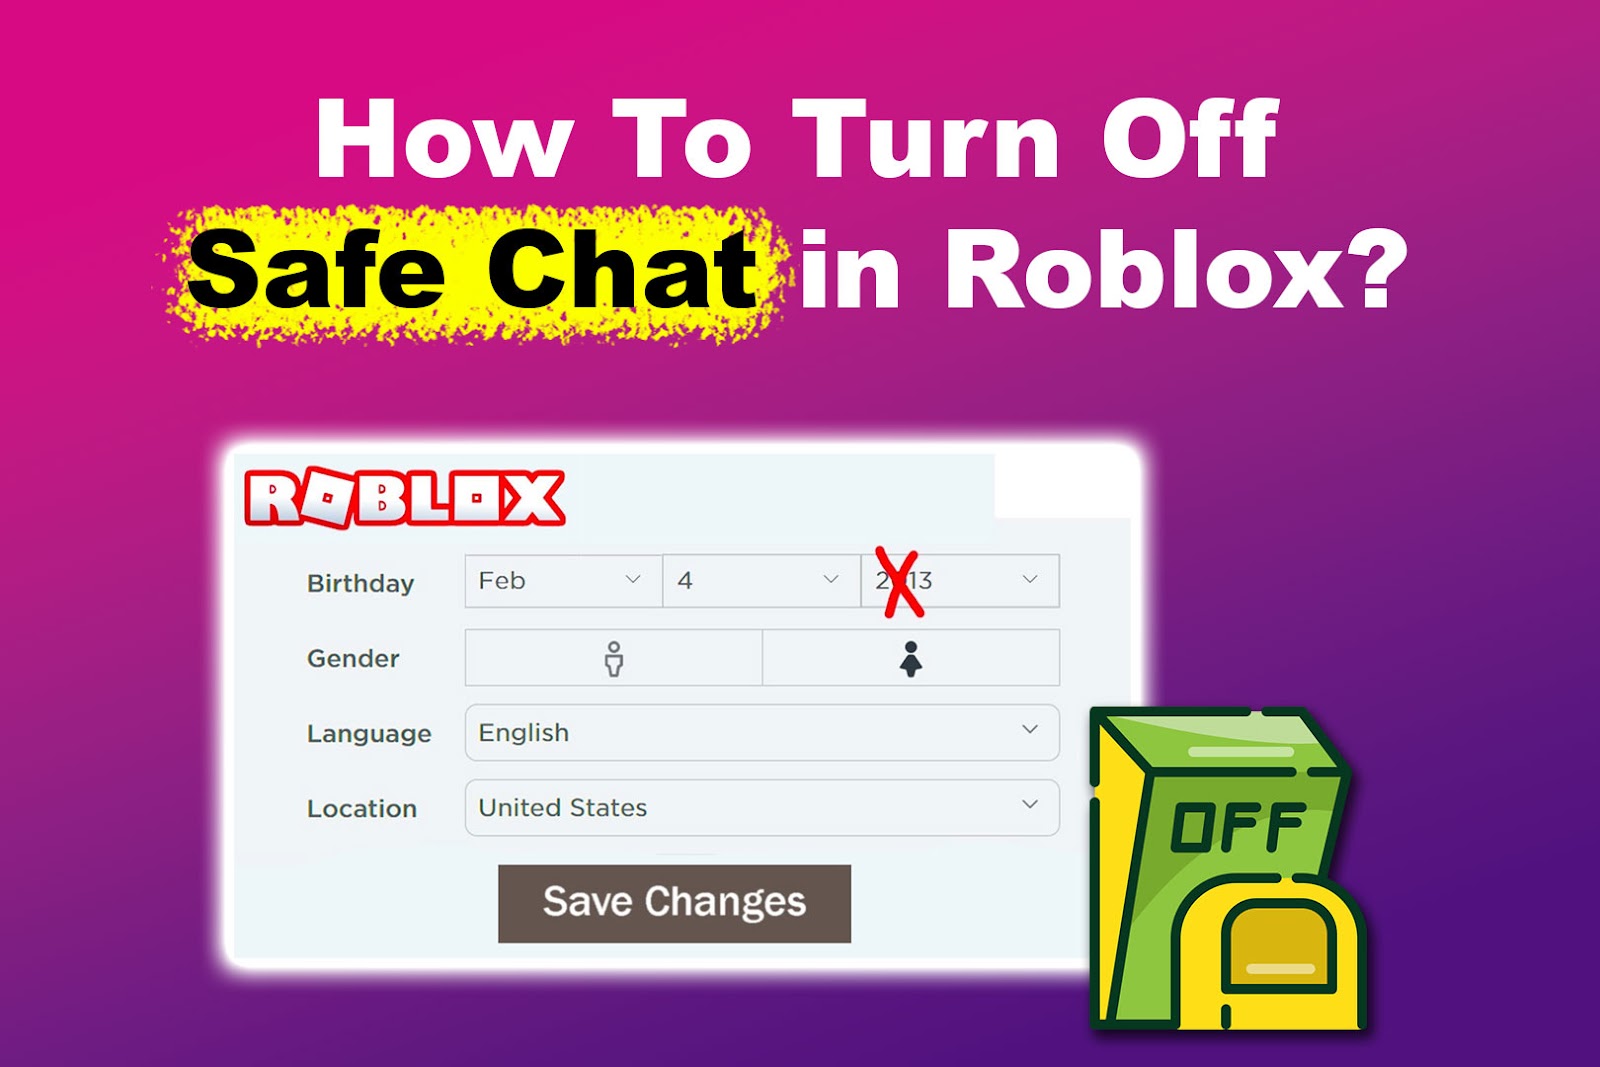 How to Turn Off Safe Chat in Roblox